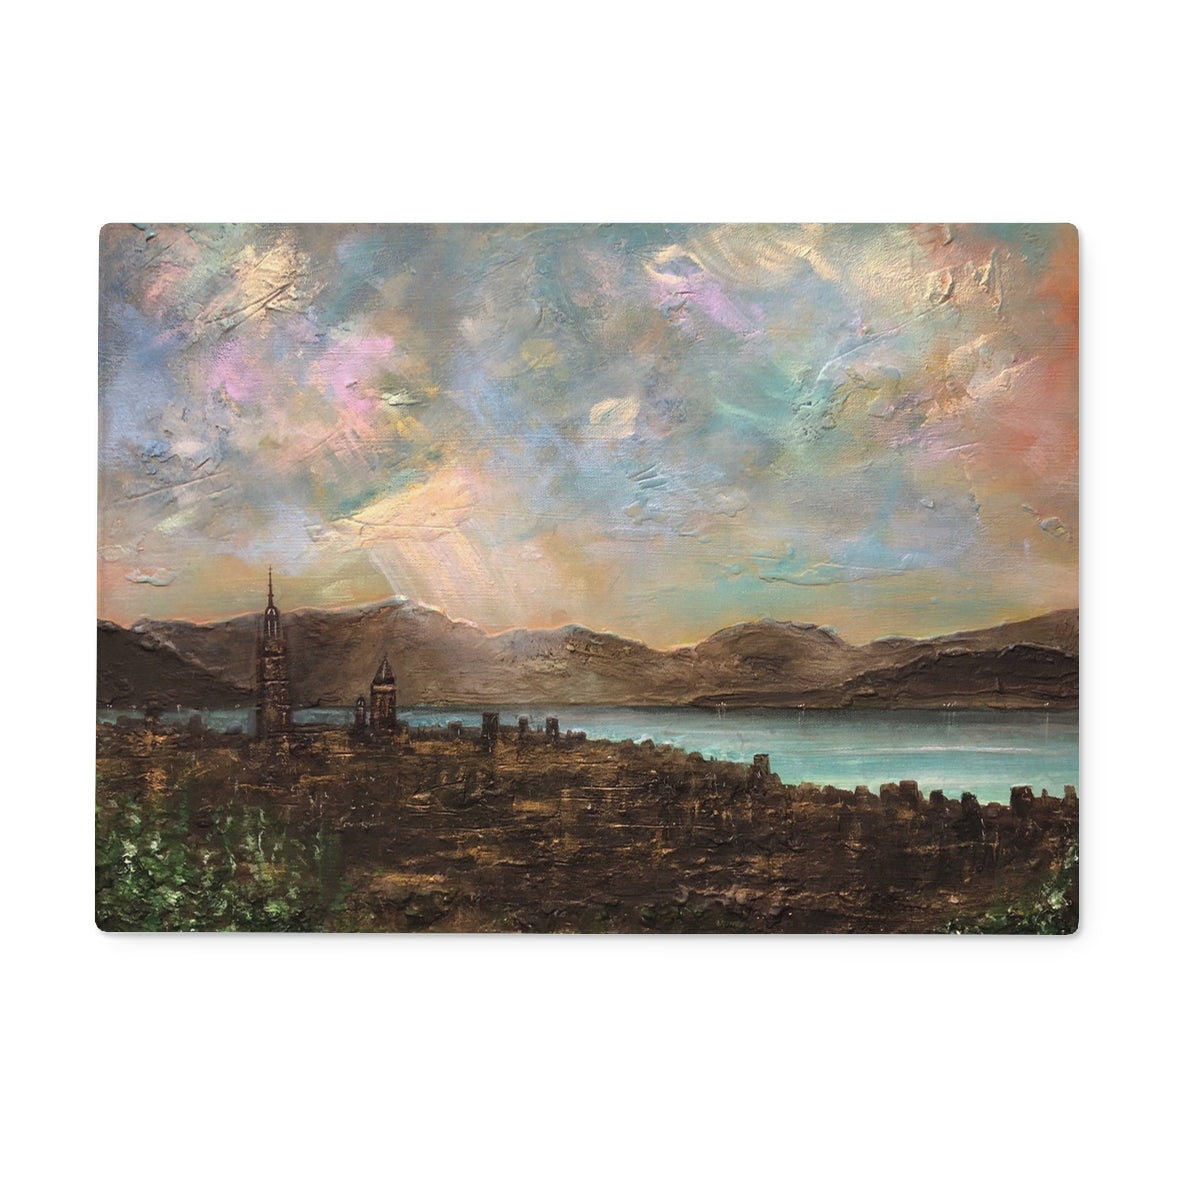 Angels Fingers Over Greenock Art Gifts Glass Chopping Board-Glass Chopping Boards-River Clyde Art Gallery-15"x11" Rectangular-Paintings, Prints, Homeware, Art Gifts From Scotland By Scottish Artist Kevin Hunter